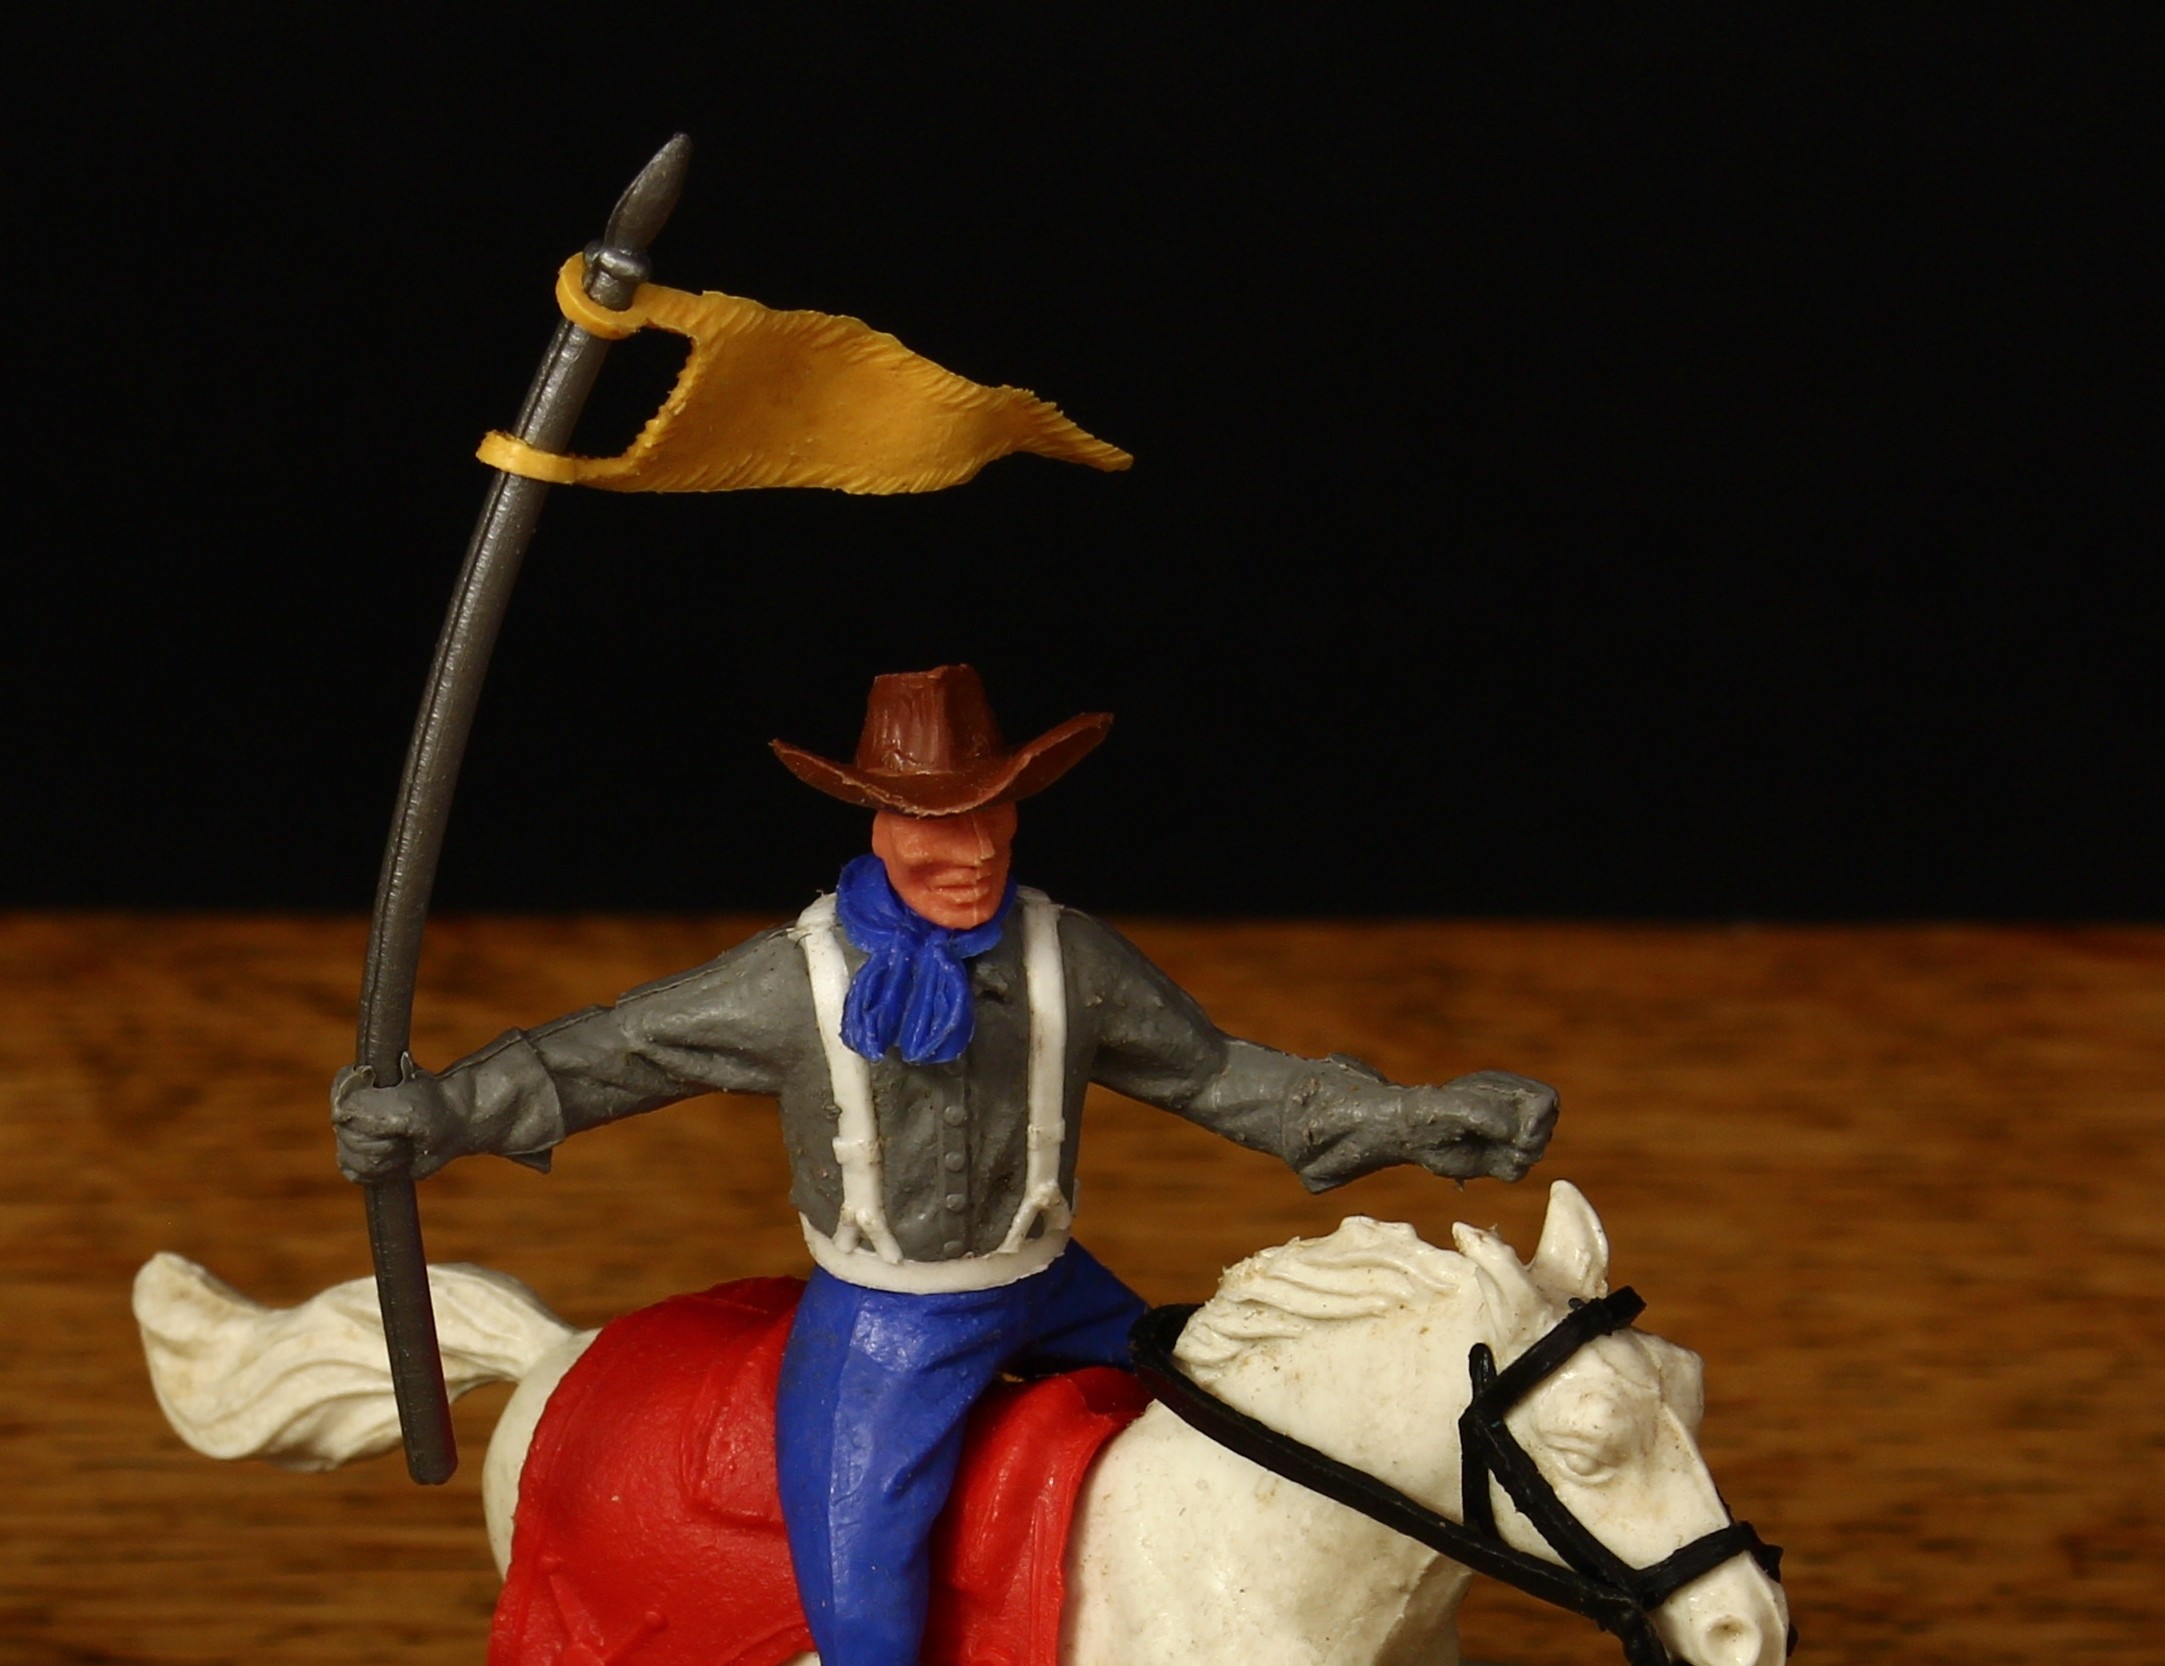 Timpo Toys plastic 'Swoppet' figures, comprising a U.S. 7th Cavalry figure, mounted on horseback, - Image 2 of 2